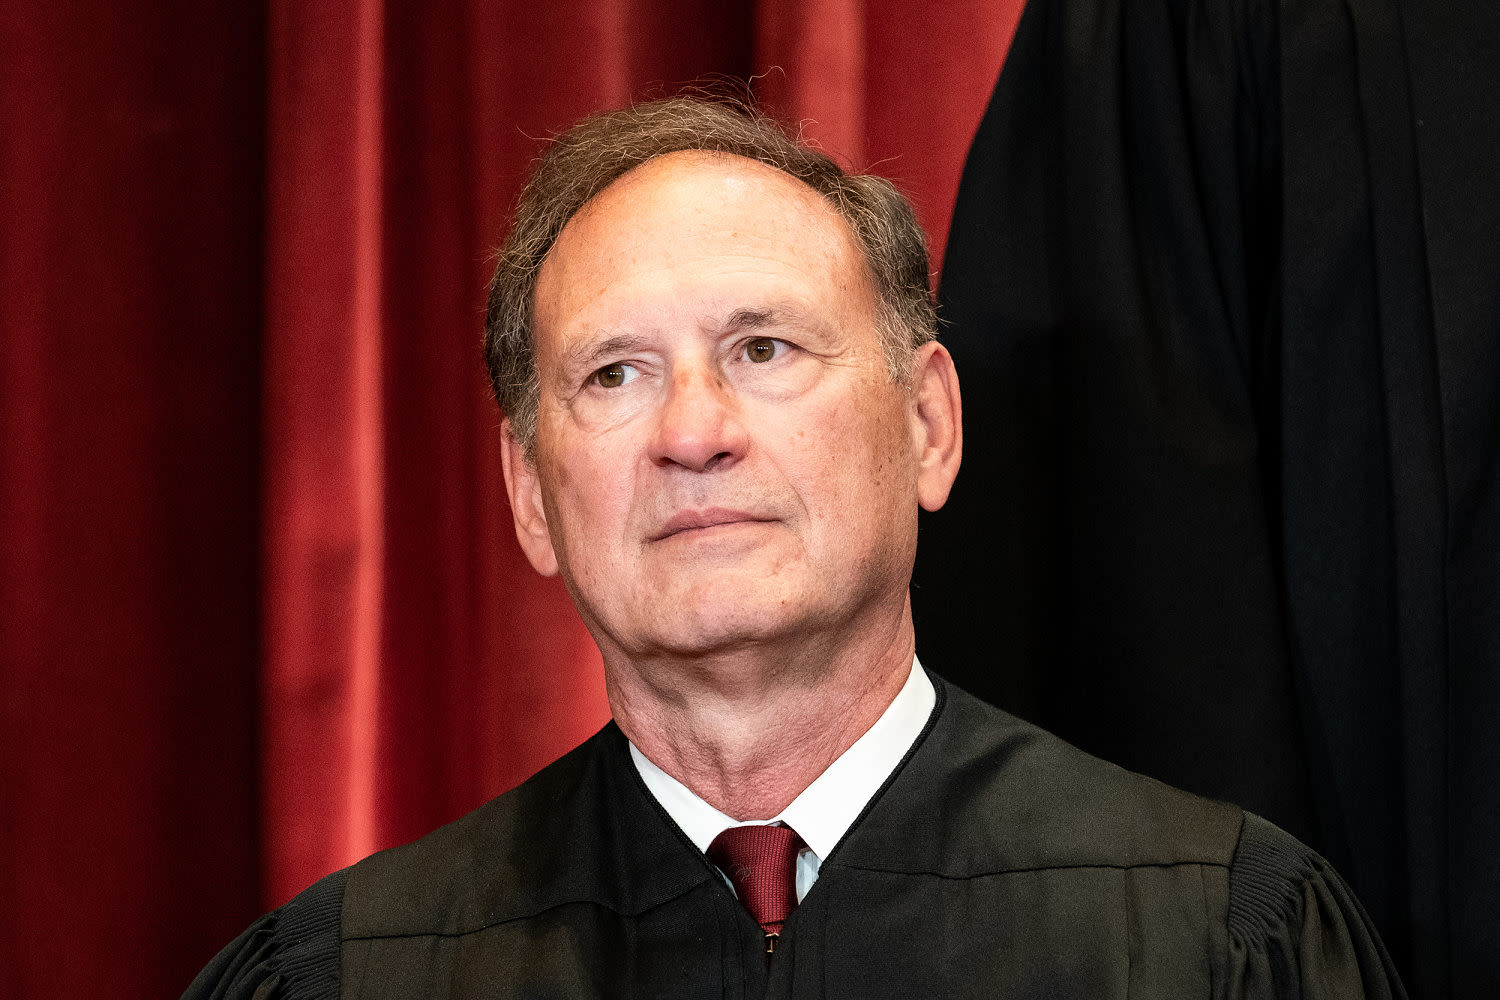 Opinion | It’s time for Justice Alito to face some consequences